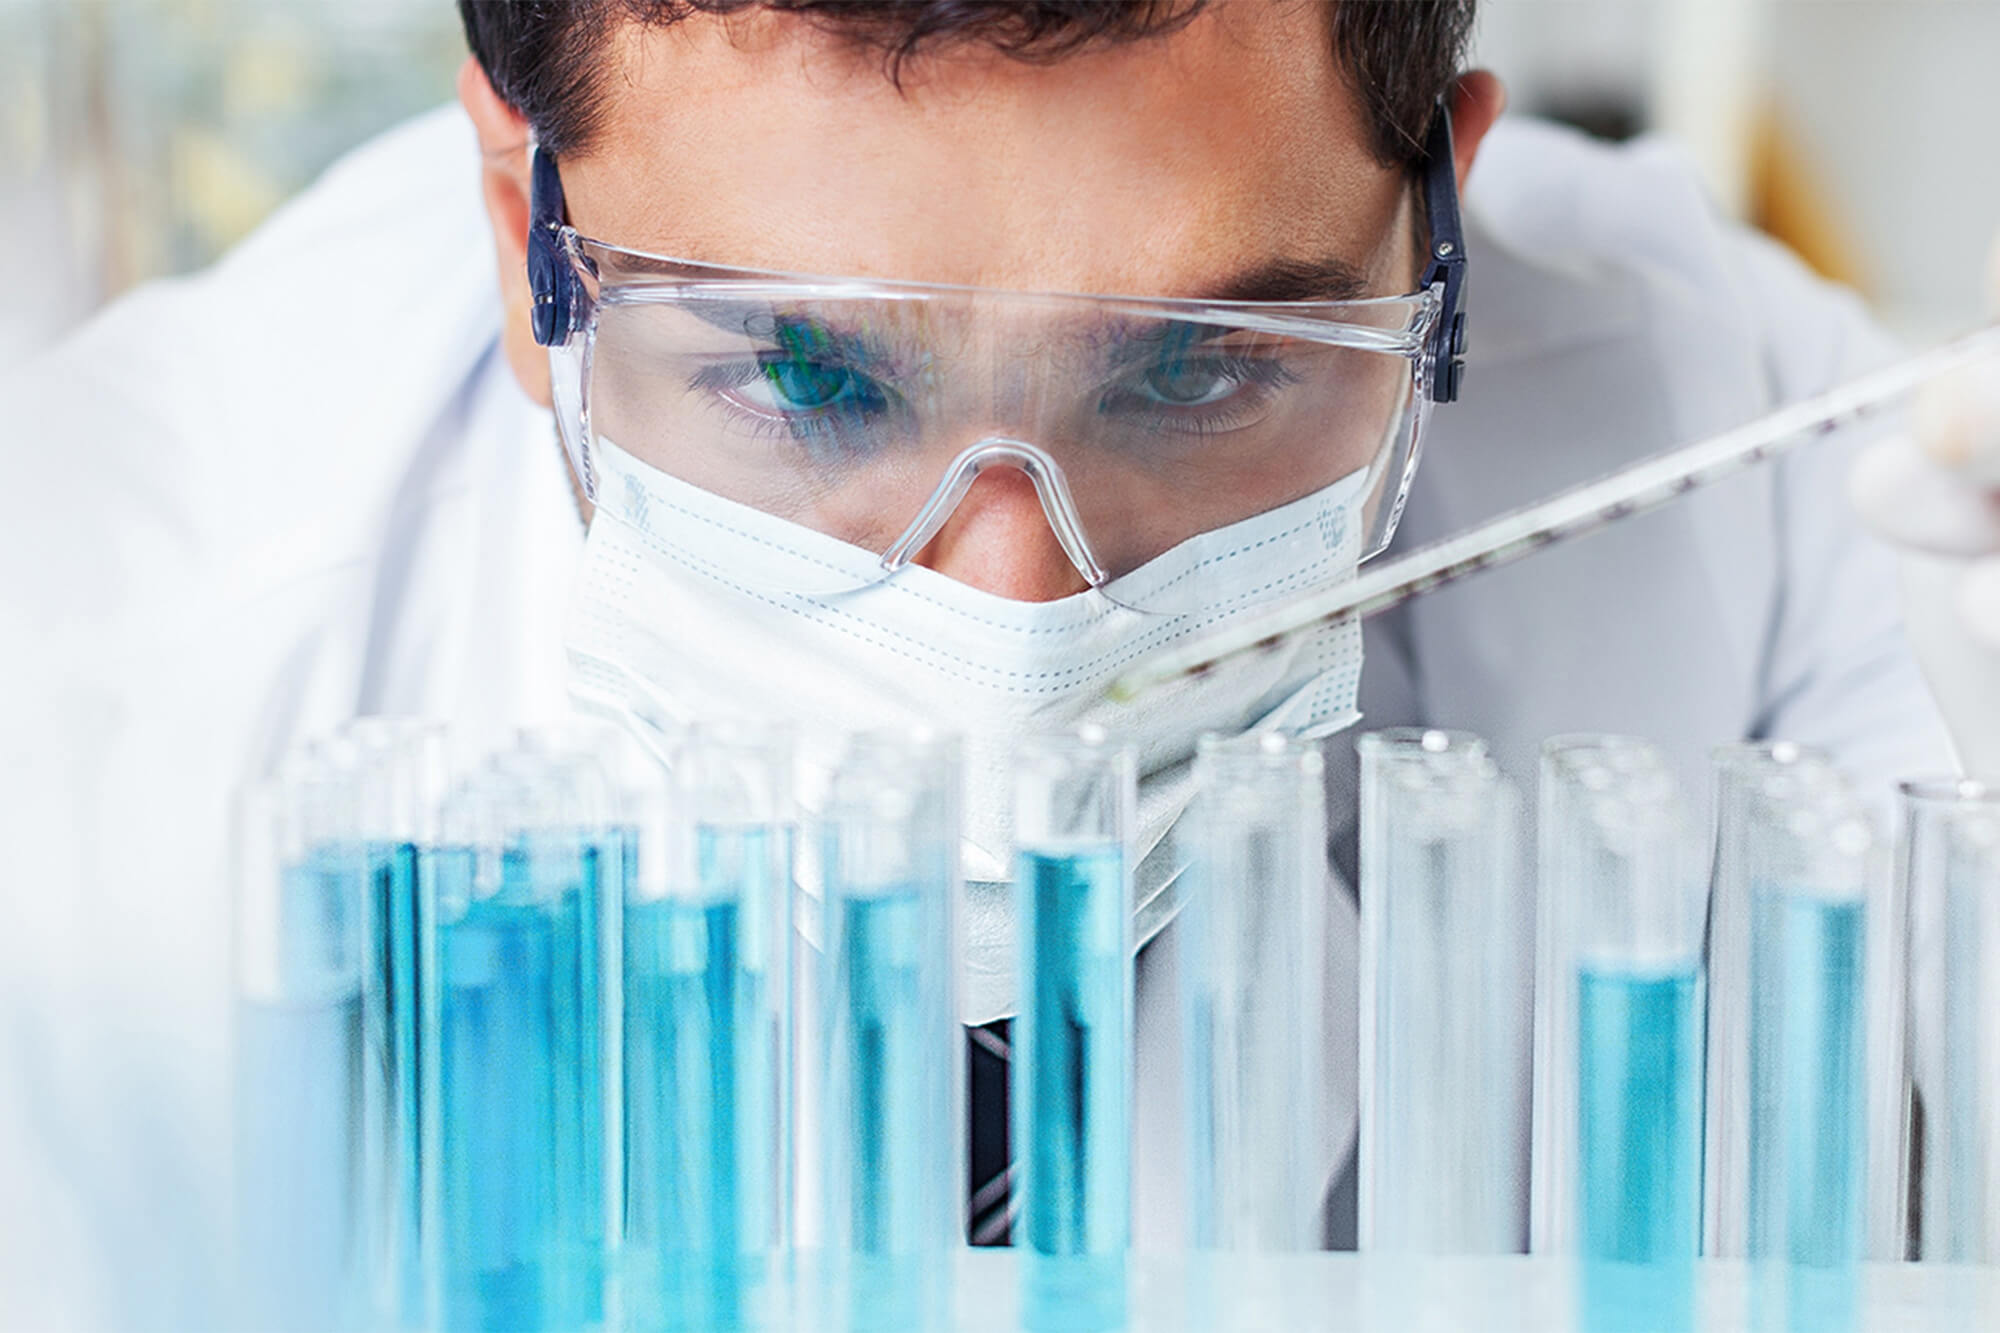 Photo of man with safety glasses and face mask with test tubes filled with blue liquid.